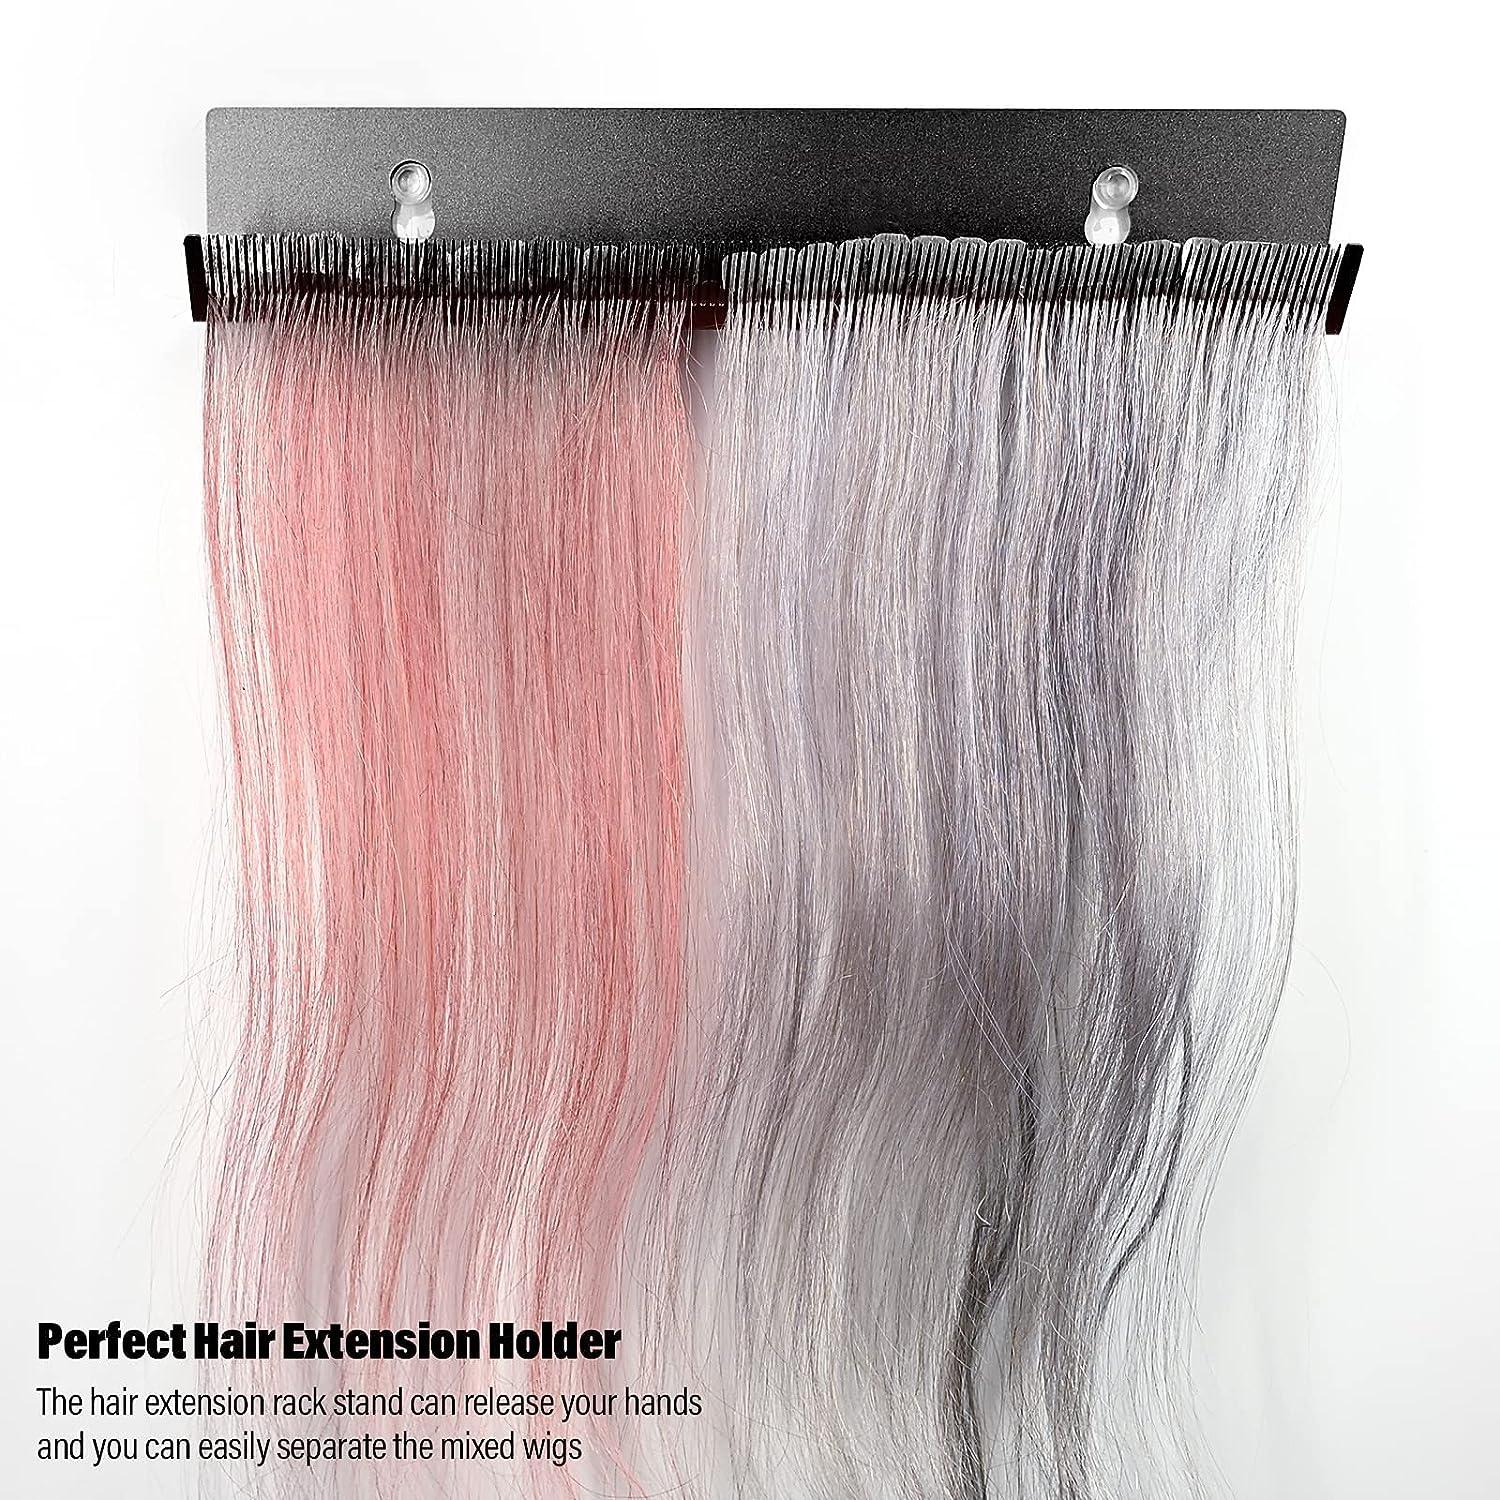 EHDIS Hair Extension Holder for Styling Hair Stands Stainless Steel Hair  Extension Display Hair Hanger Tool for Washing, Coloring and Blow-Drying of